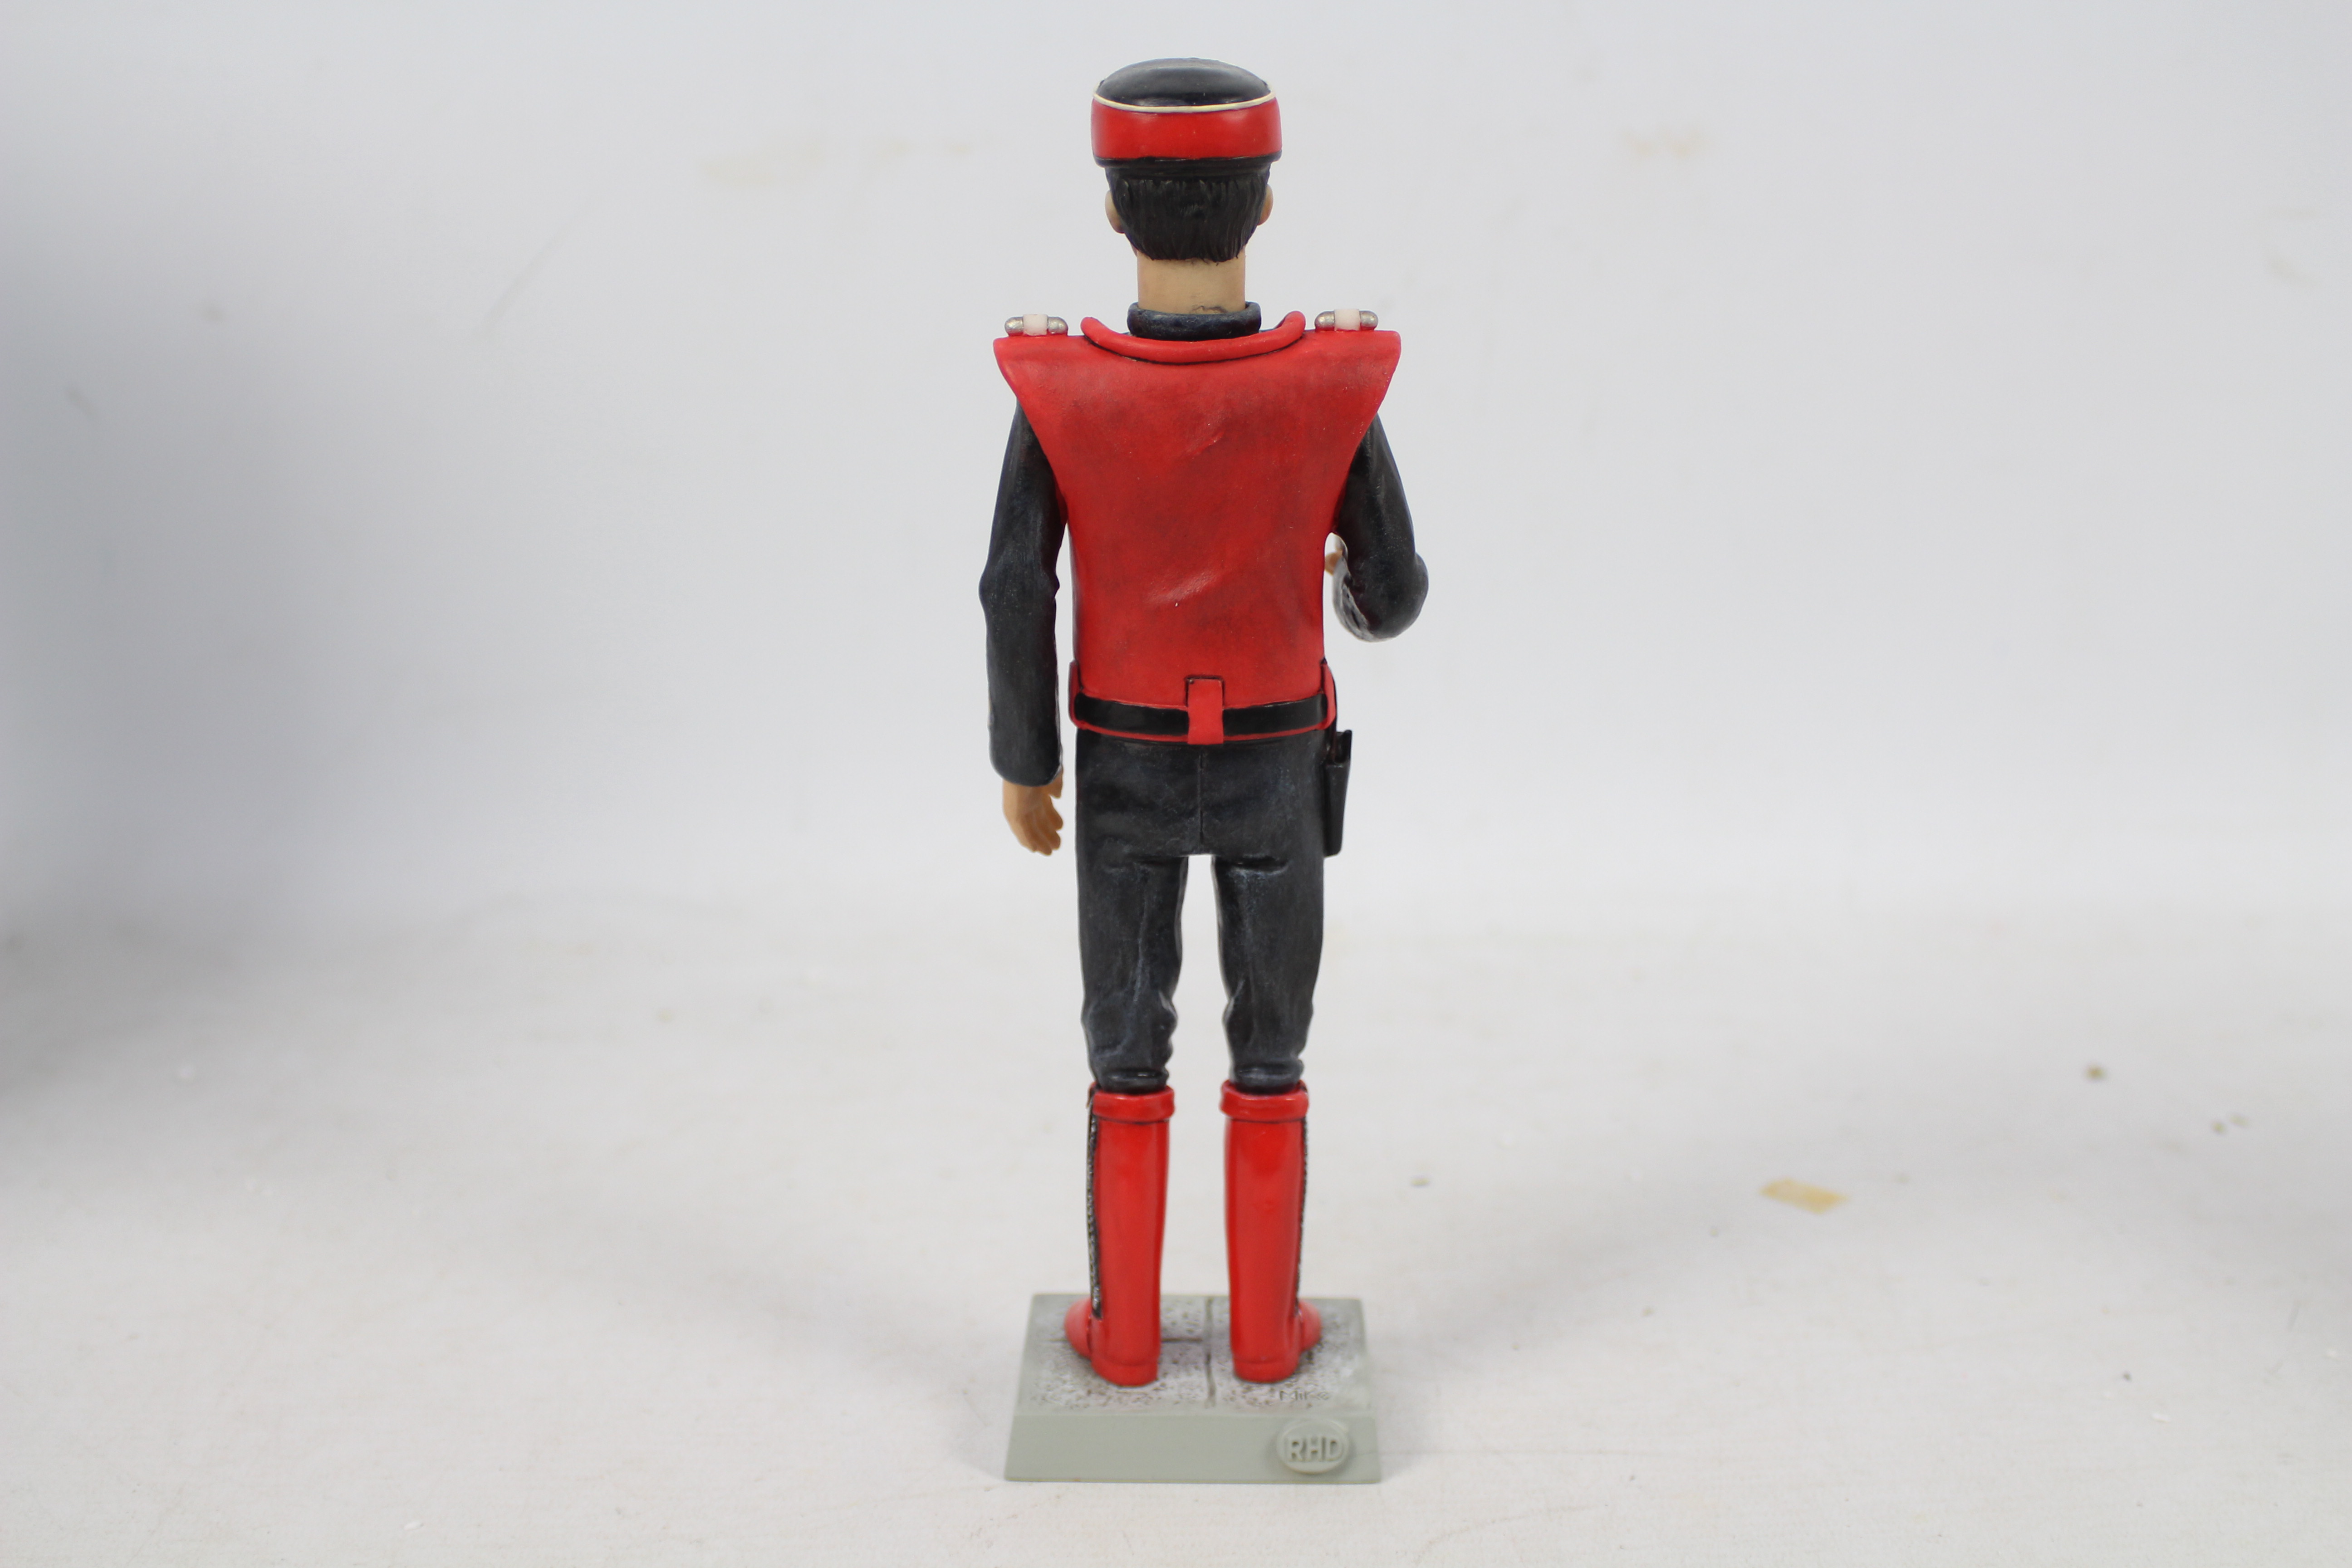 Captain Scarlet - A limited edition Robert Harrop figure of Captain Scarlet from the Gerry Anderson - Image 3 of 4